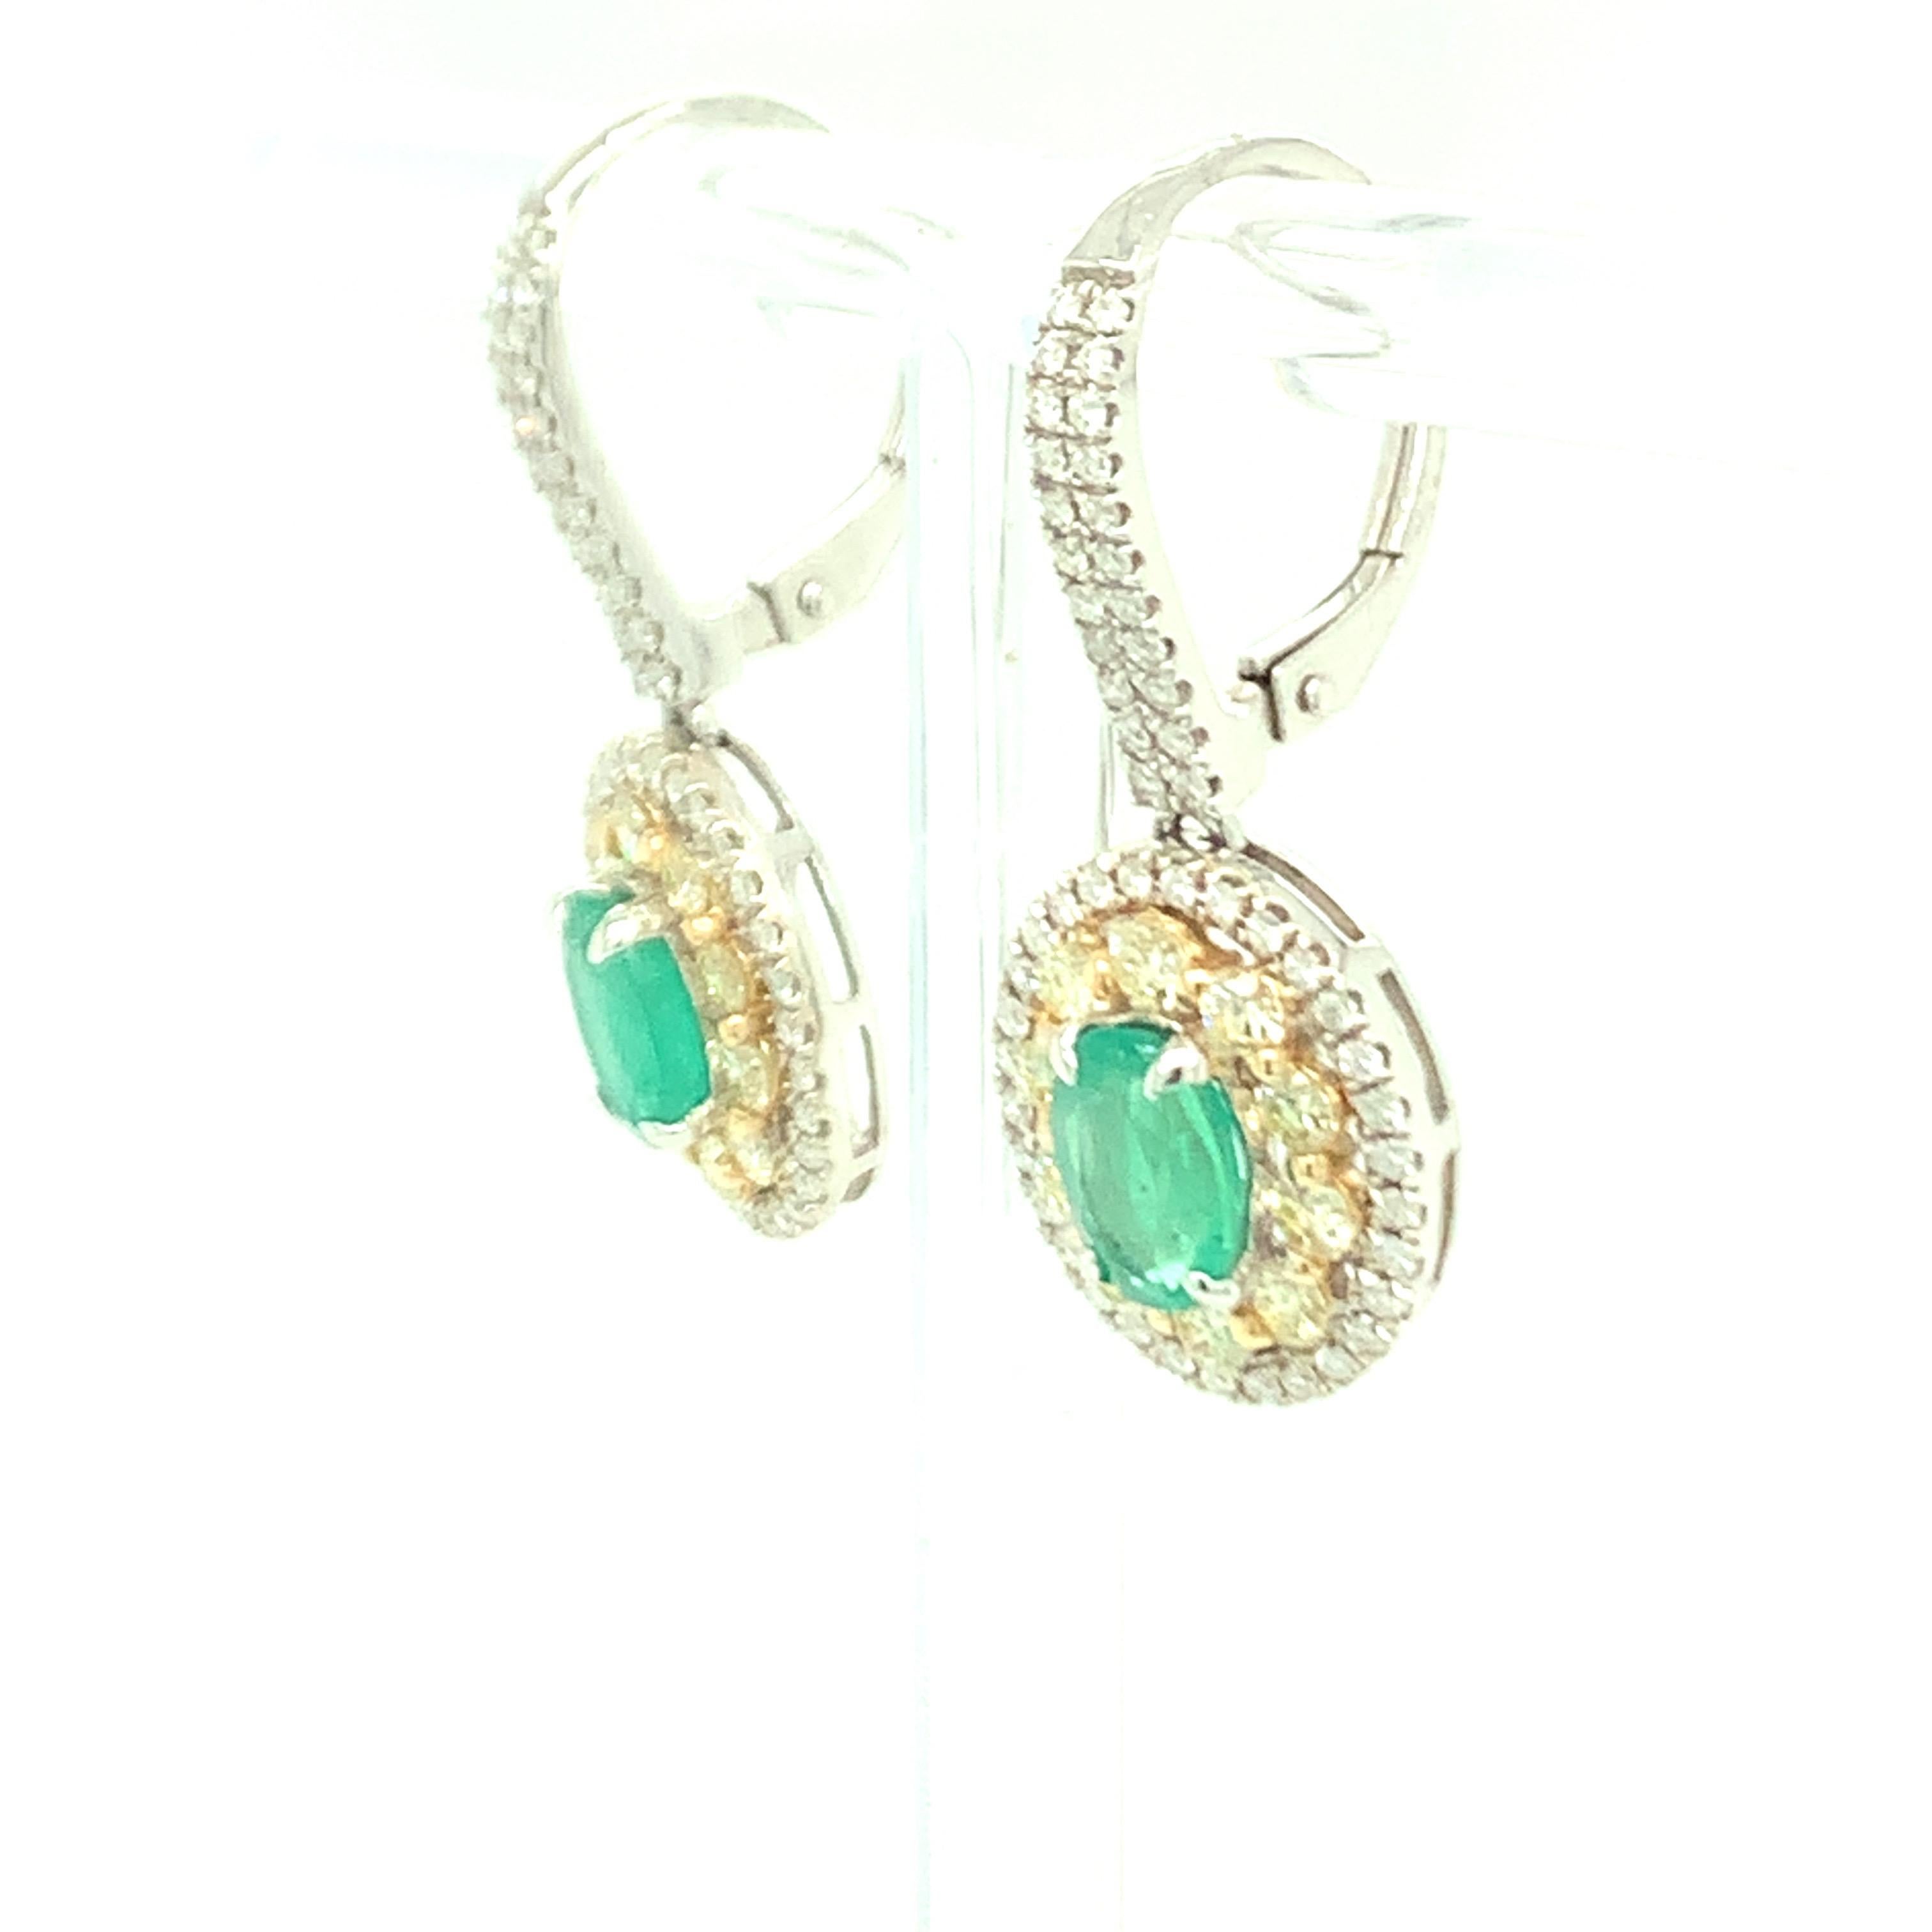 Oval Cut 1.5 Carat Emerald Earrings with Yellow and White Diamond Set in Two Tone Gold